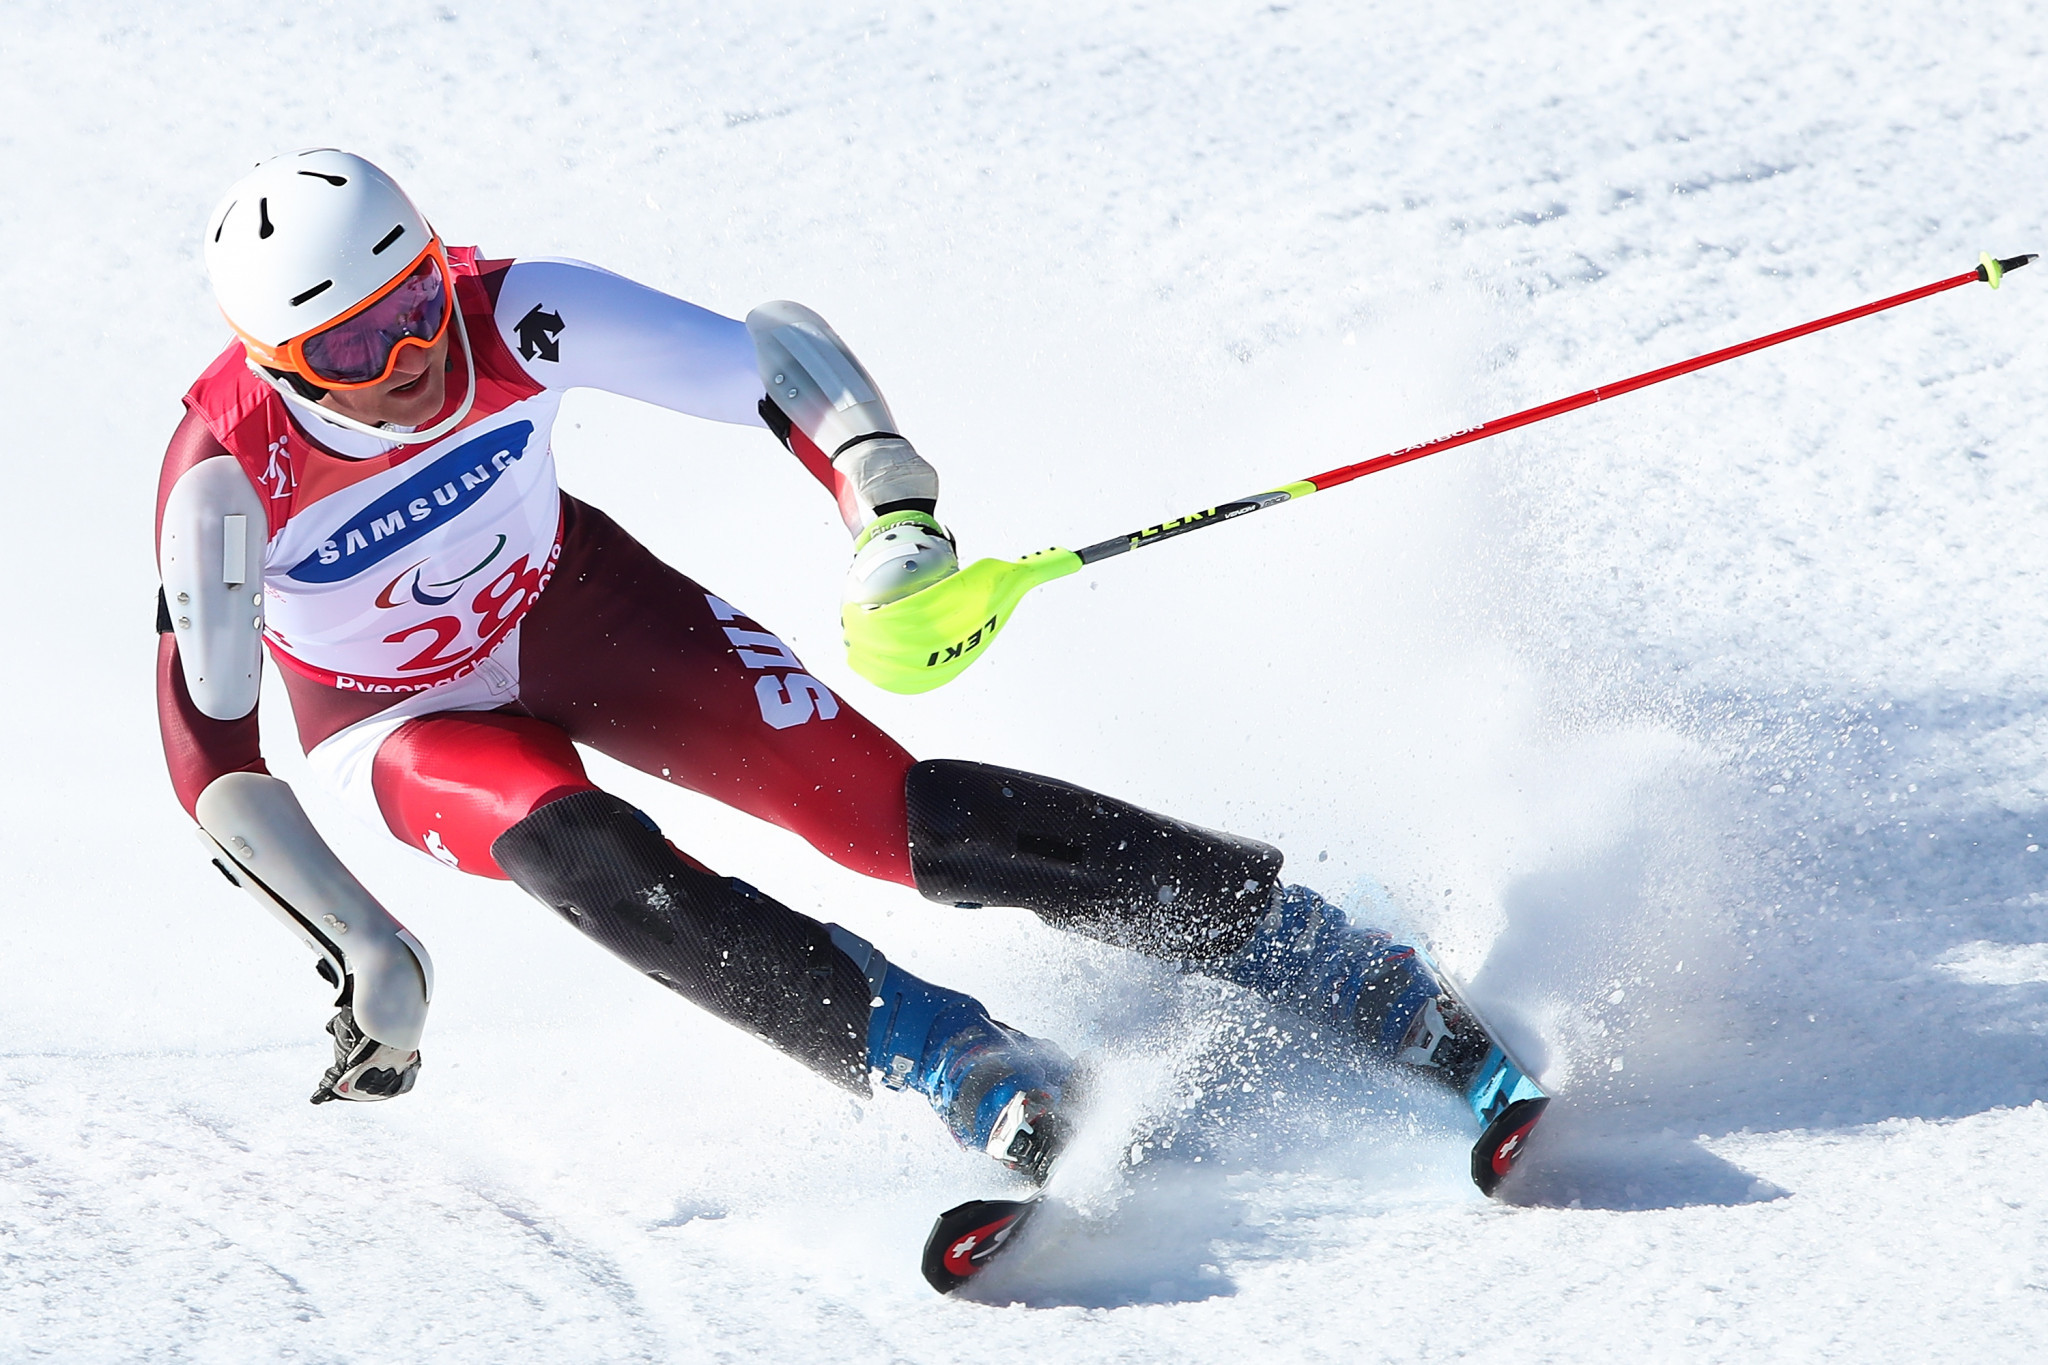 Hosts win two golds in super combined competition at World Para Alpine Skiing Europa Cup Finals